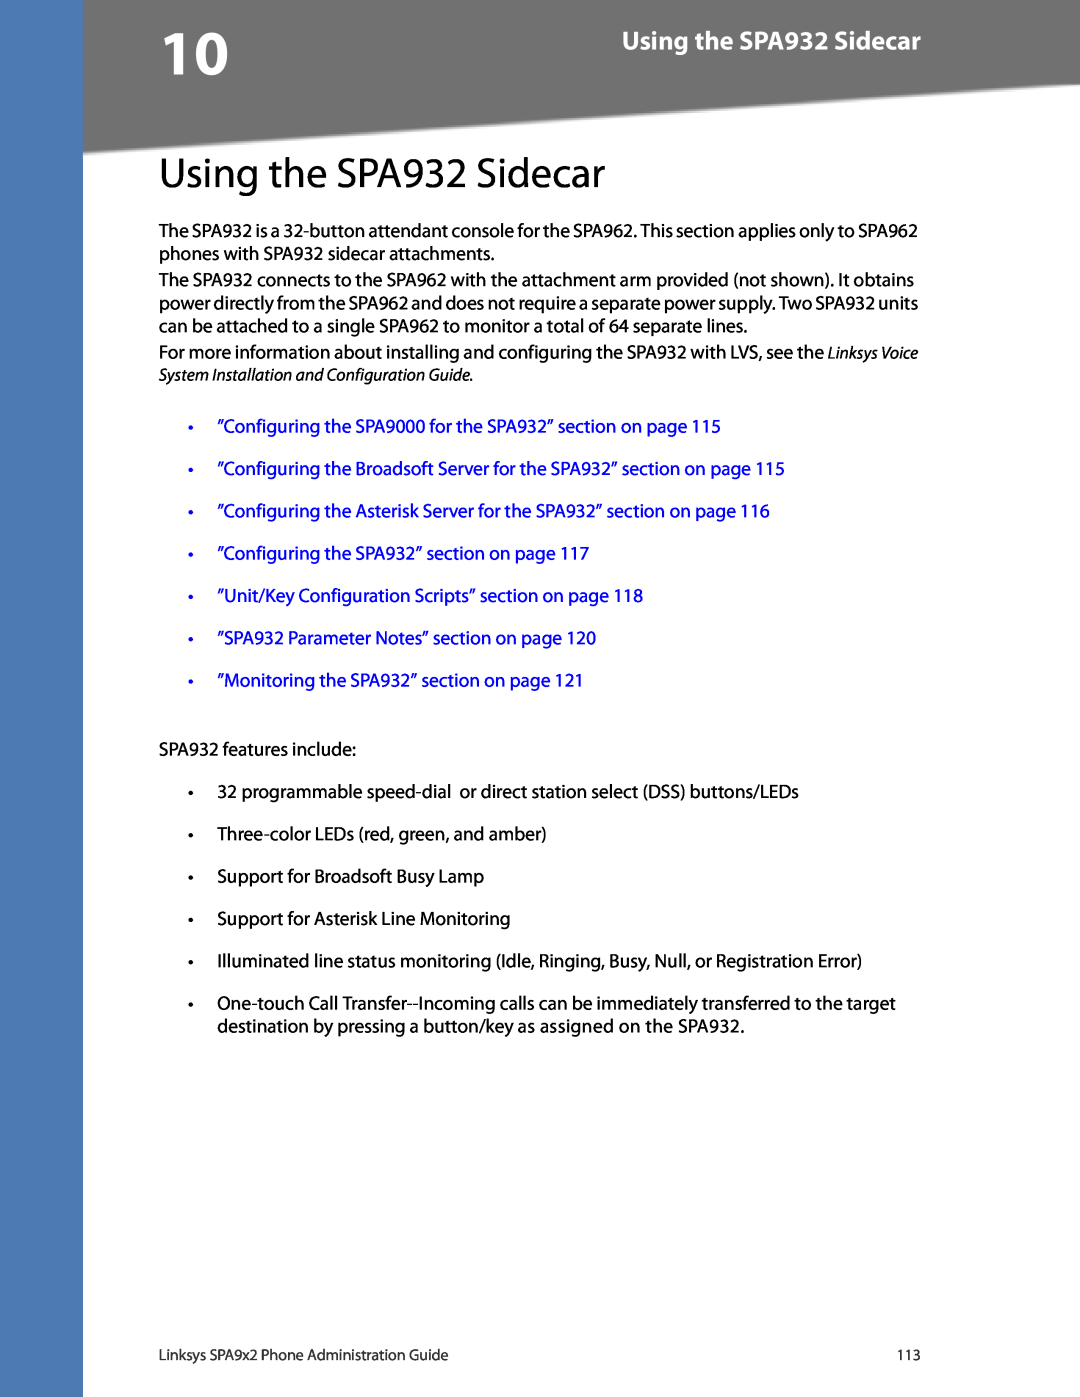 Linksys SPA962, SPA942, SPA922 manual Using the SPA932 Sidecar, ”Configuring the SPA9000 for the SPA932” section on page 